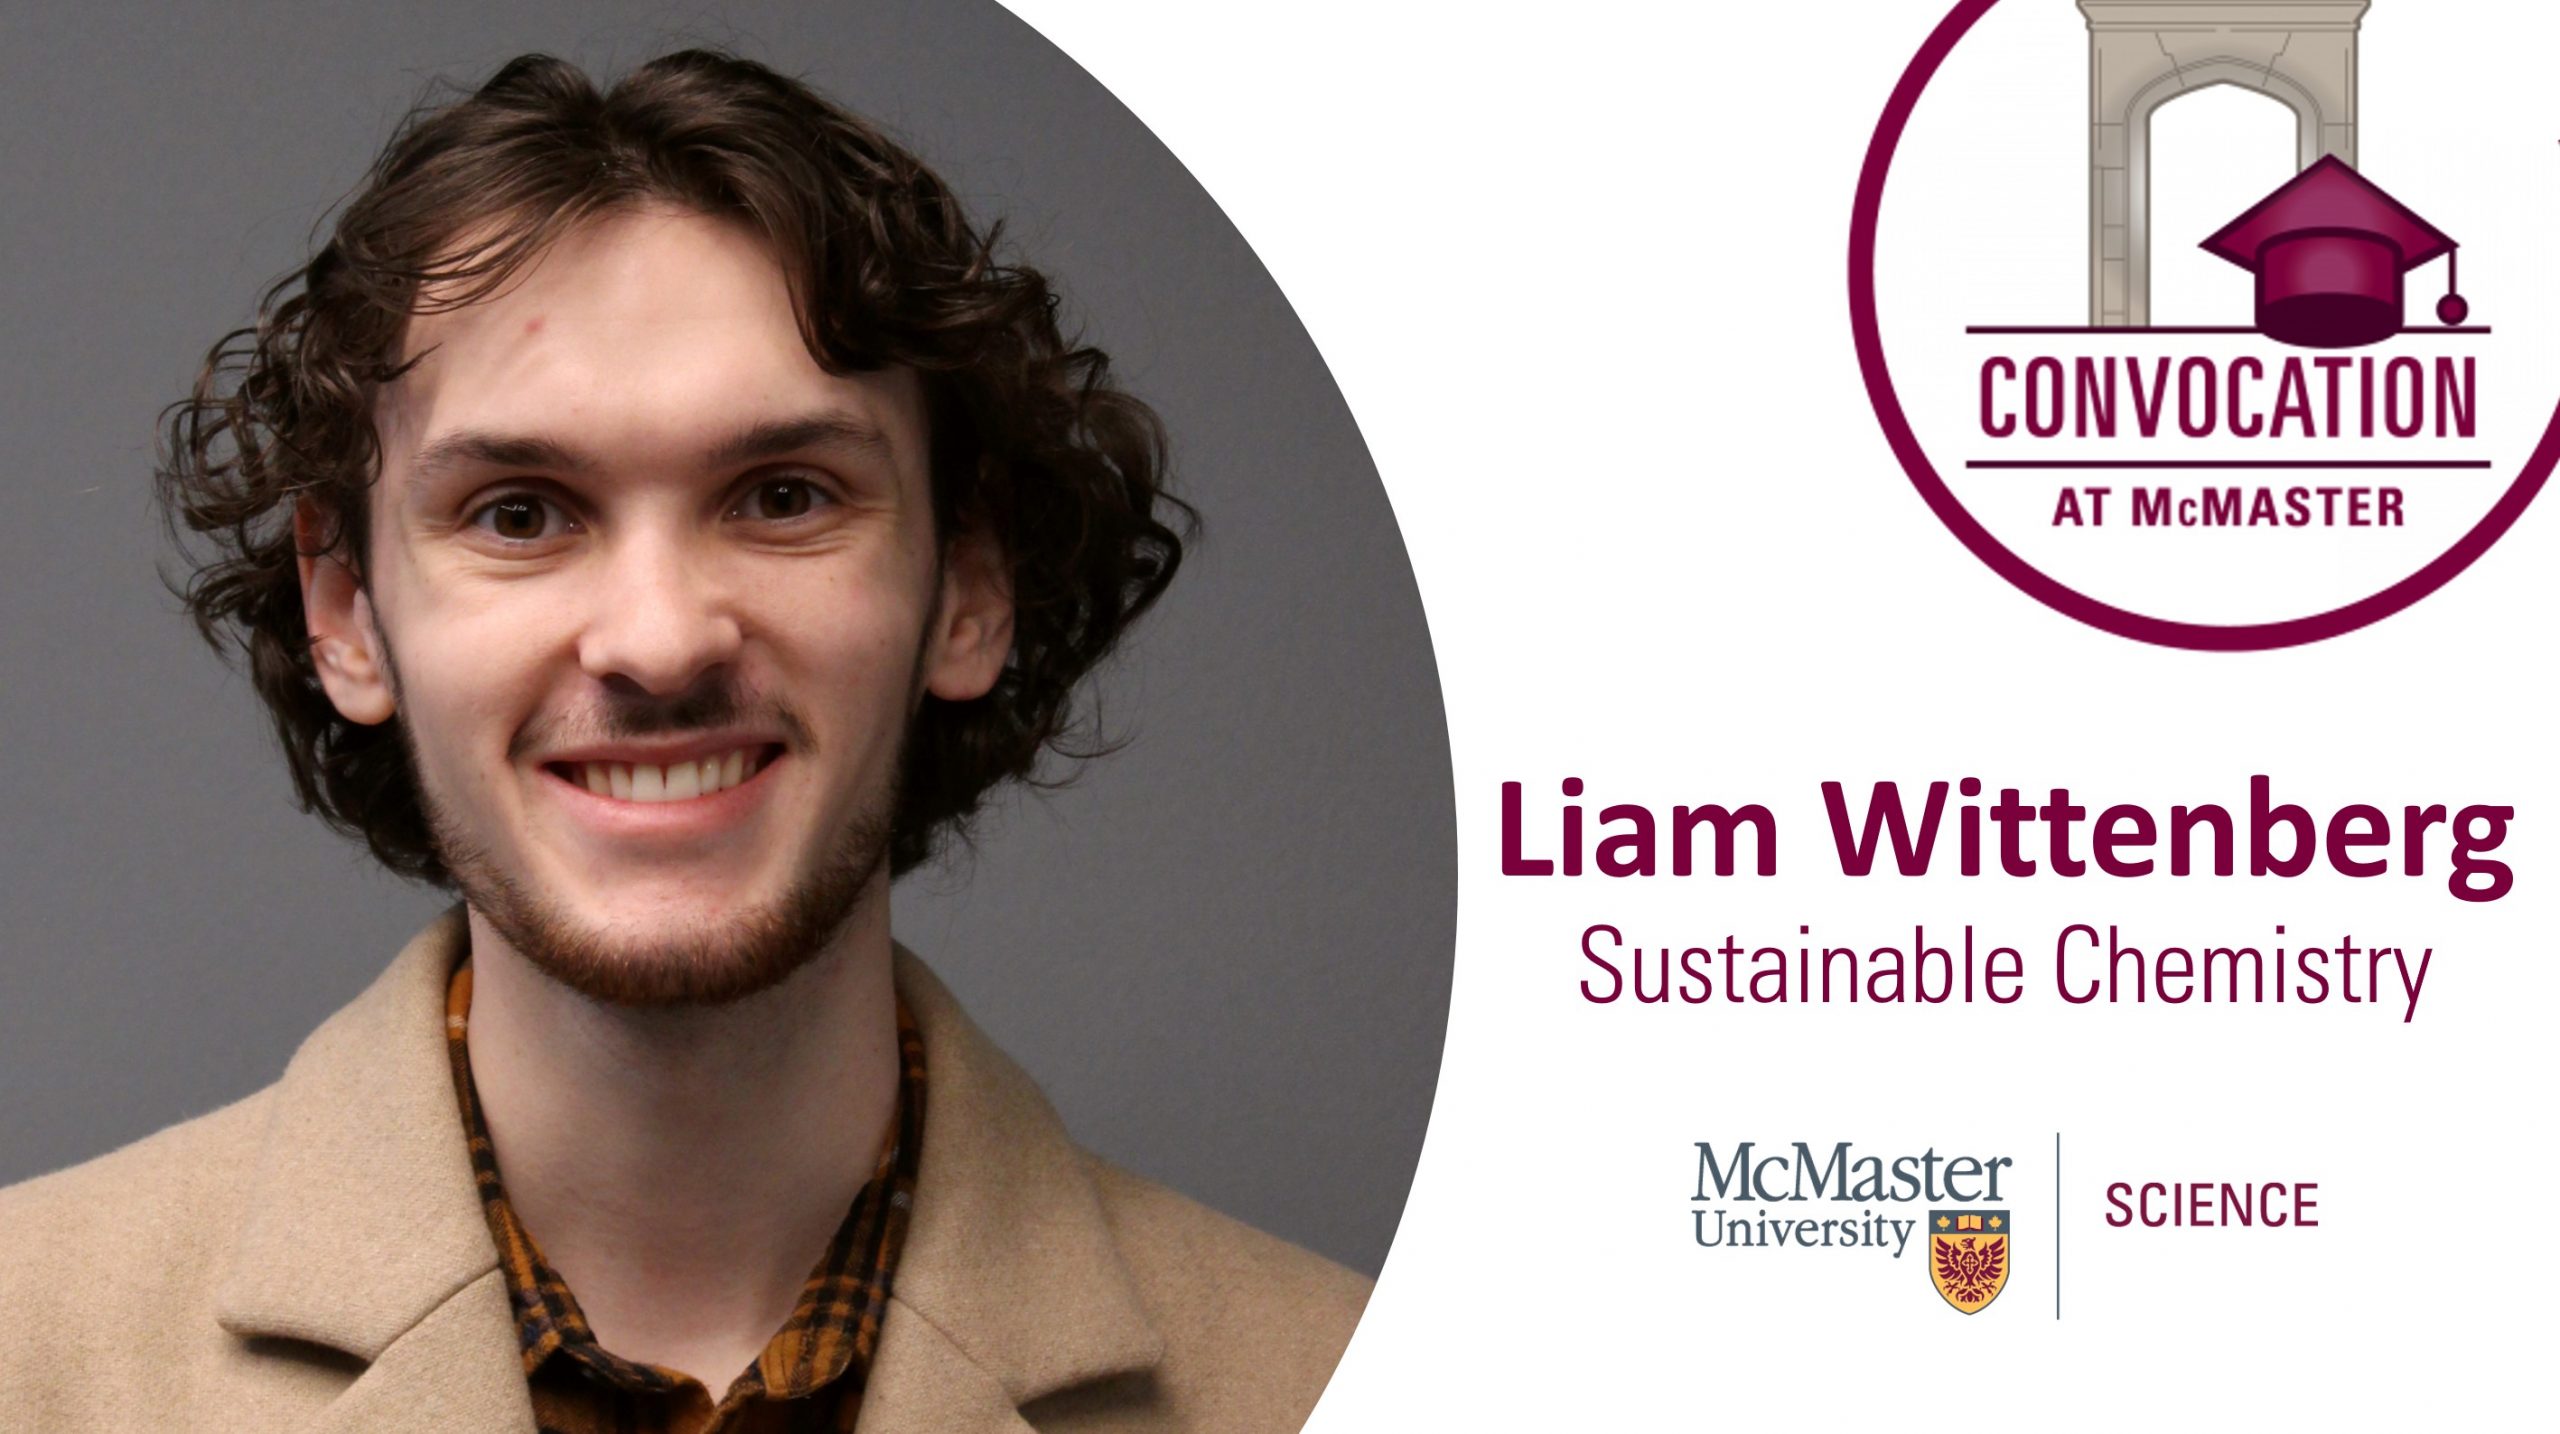 Portrait of Liam Wittenberg with the convocation logo and mcmaster science logo